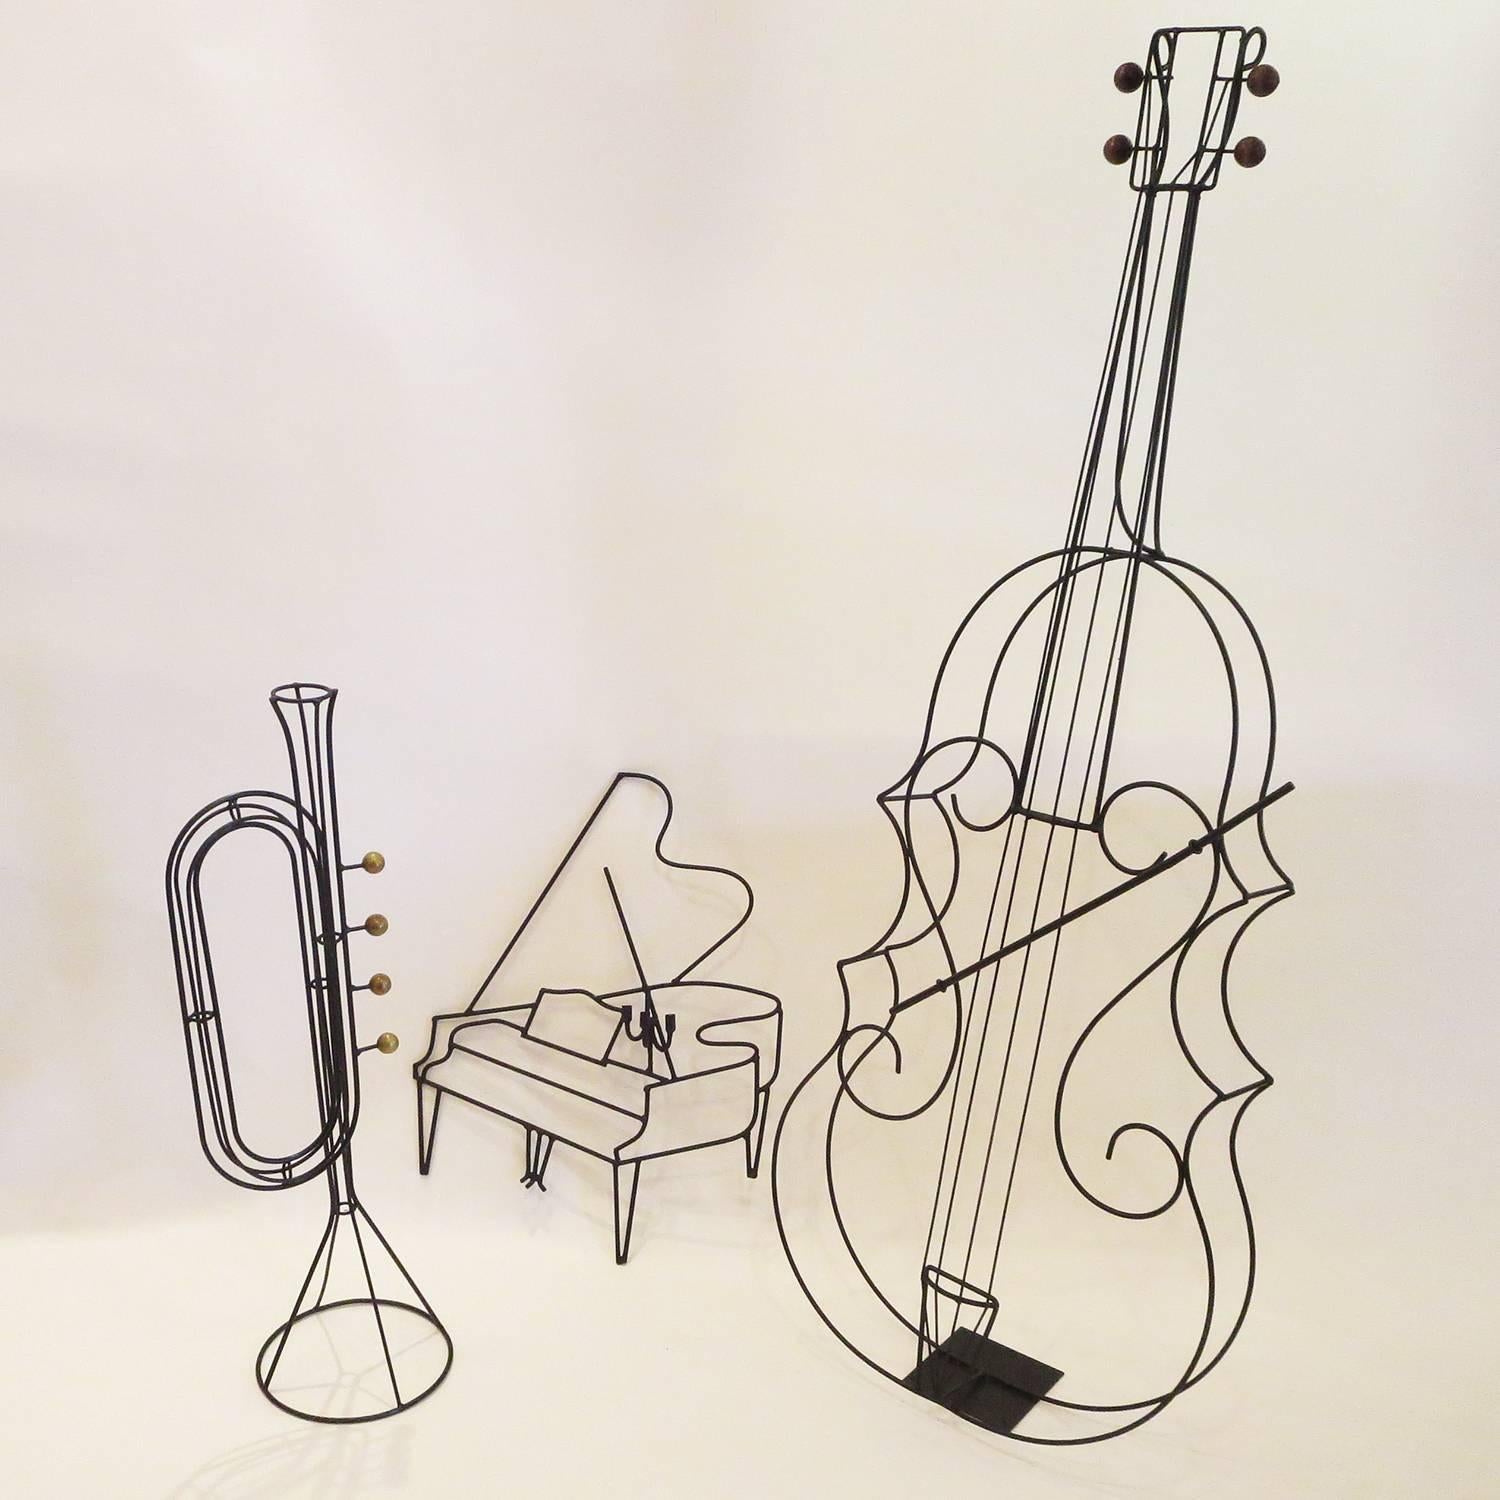 Jazz up your room with this great collection of instruments by the master of wire Frederick Weinberg. The grand piano measures 20 inches wide and is 26 inches tall. It has holders for three candles and would mount to the wall. The trumpet and